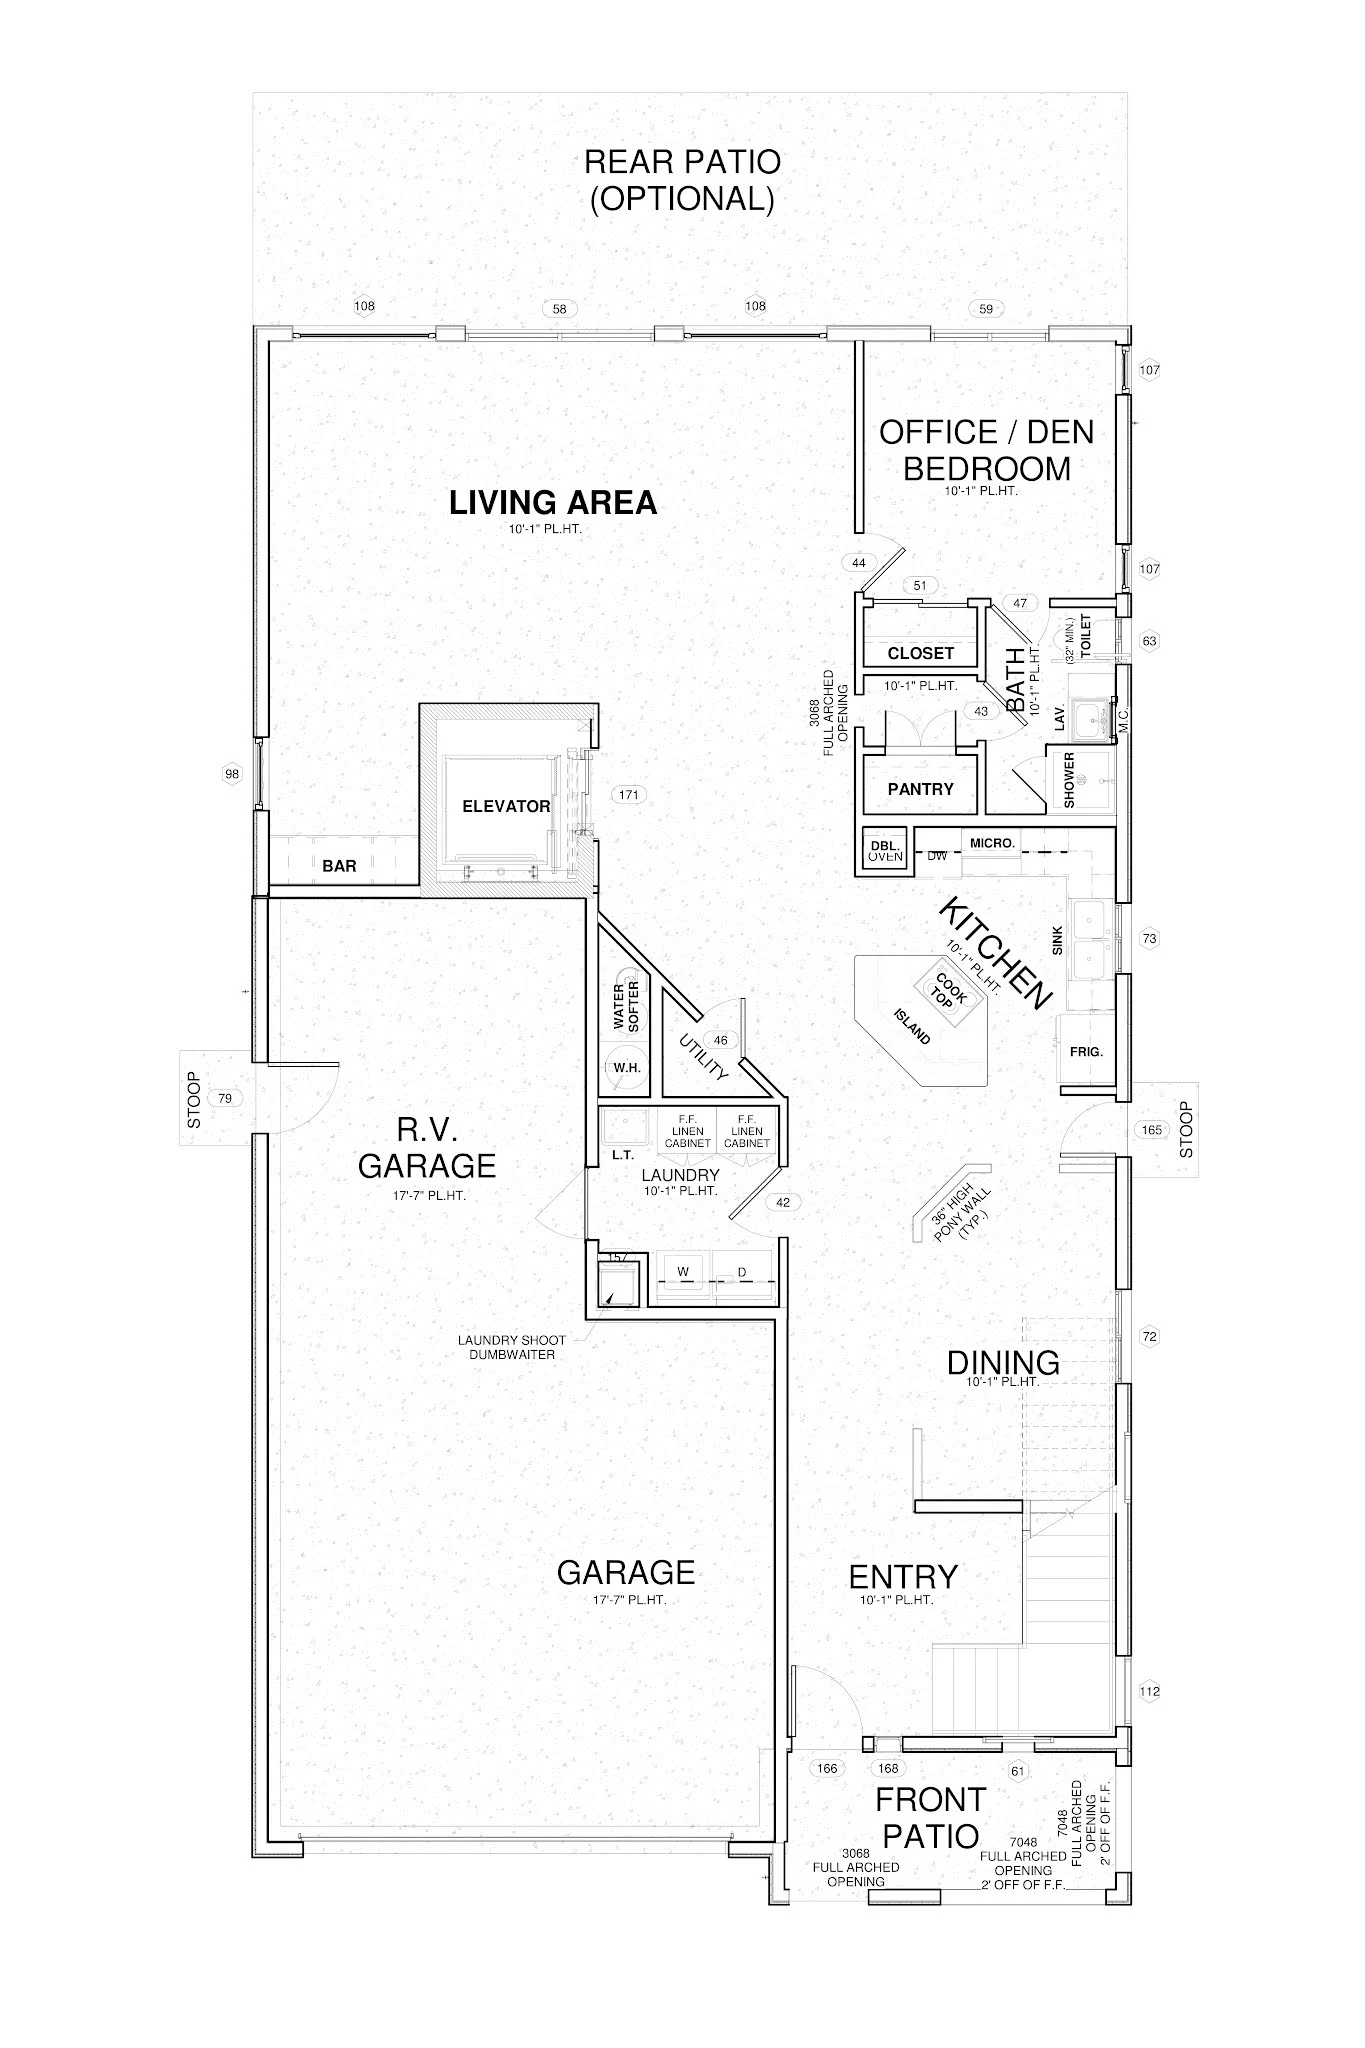 Single Family Homes 16 - ACE Design Drafting